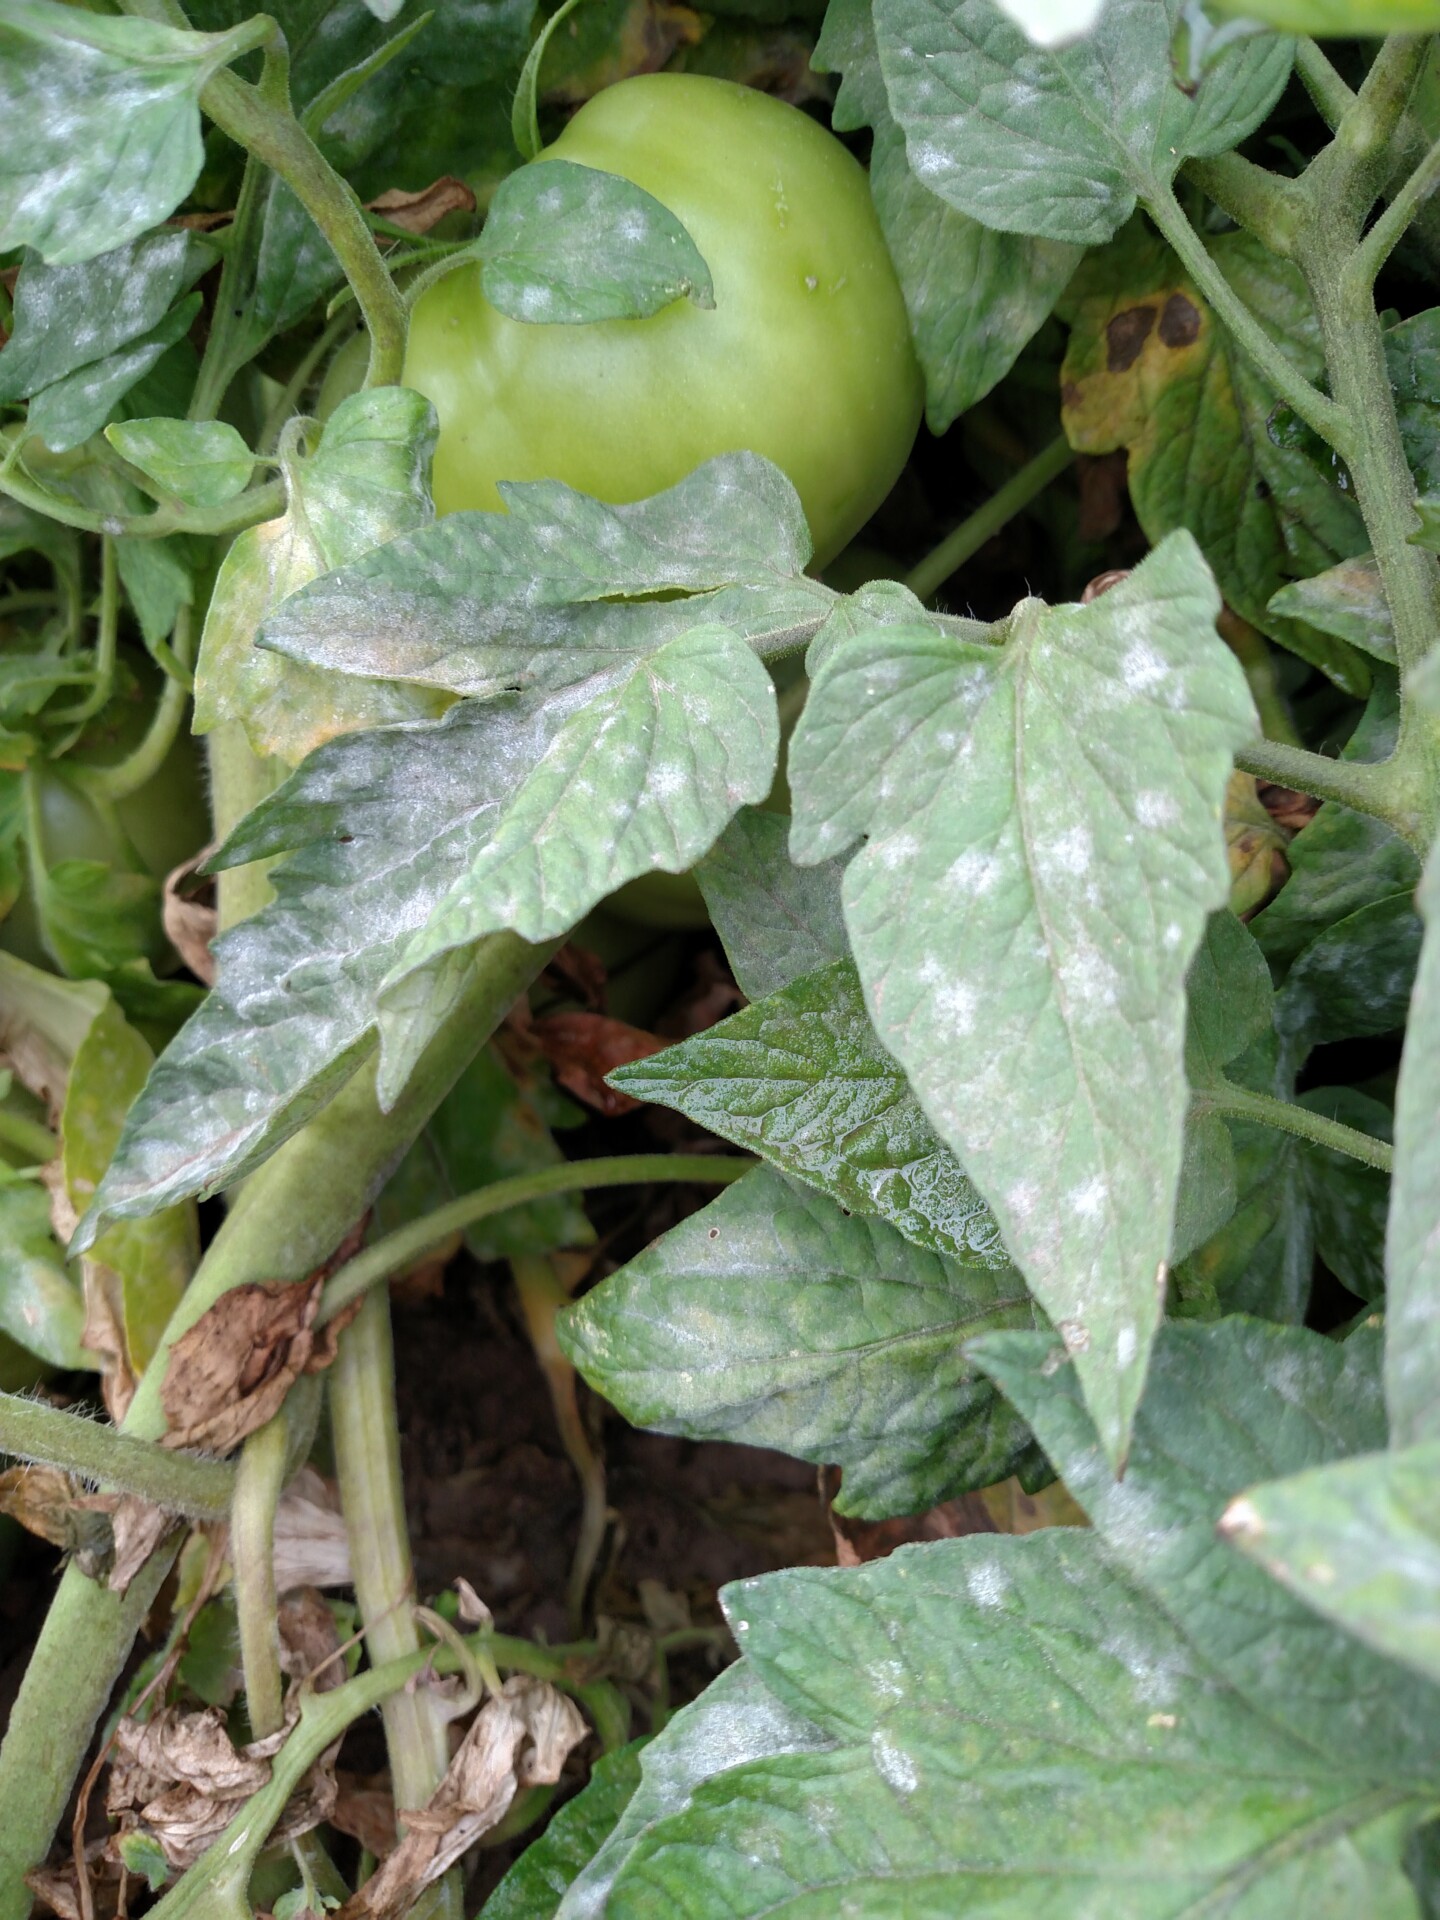 Figure 2. Powdery mildew of tomatoes has covered much of the leaf surfaces shown here.